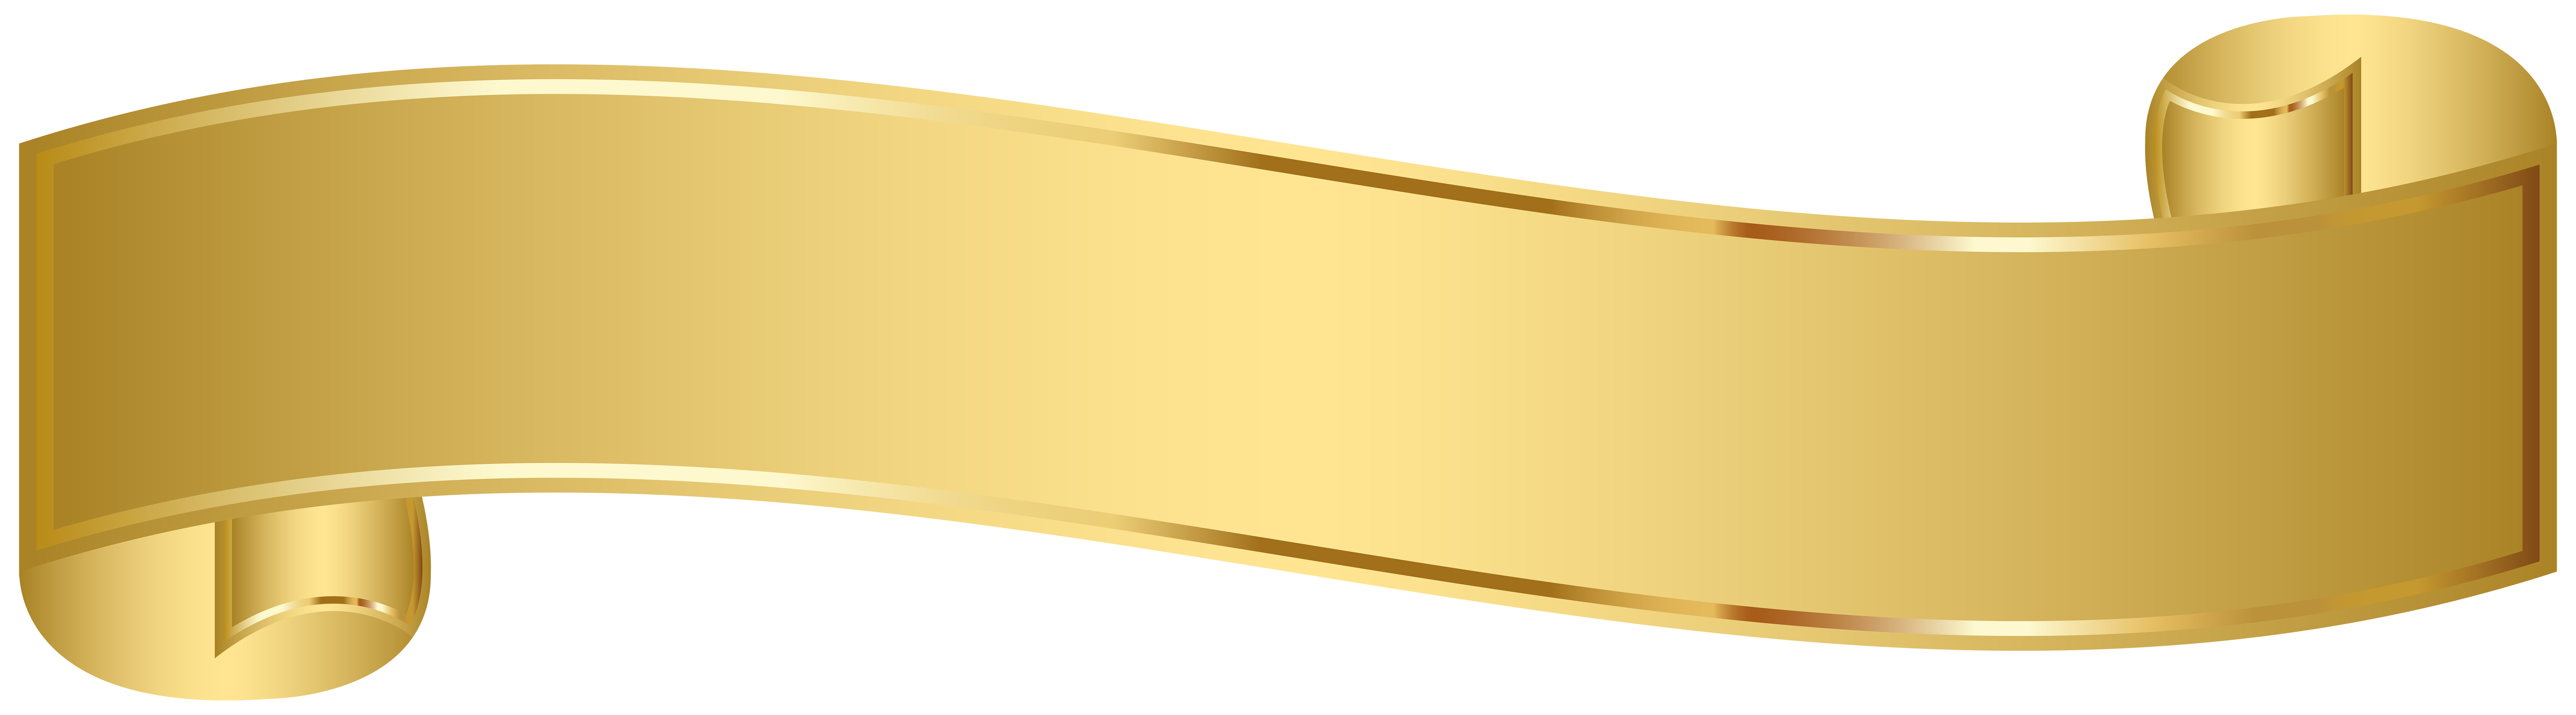 Free Gold Banner Cliparts, Download Free Clip Art, Free Clip